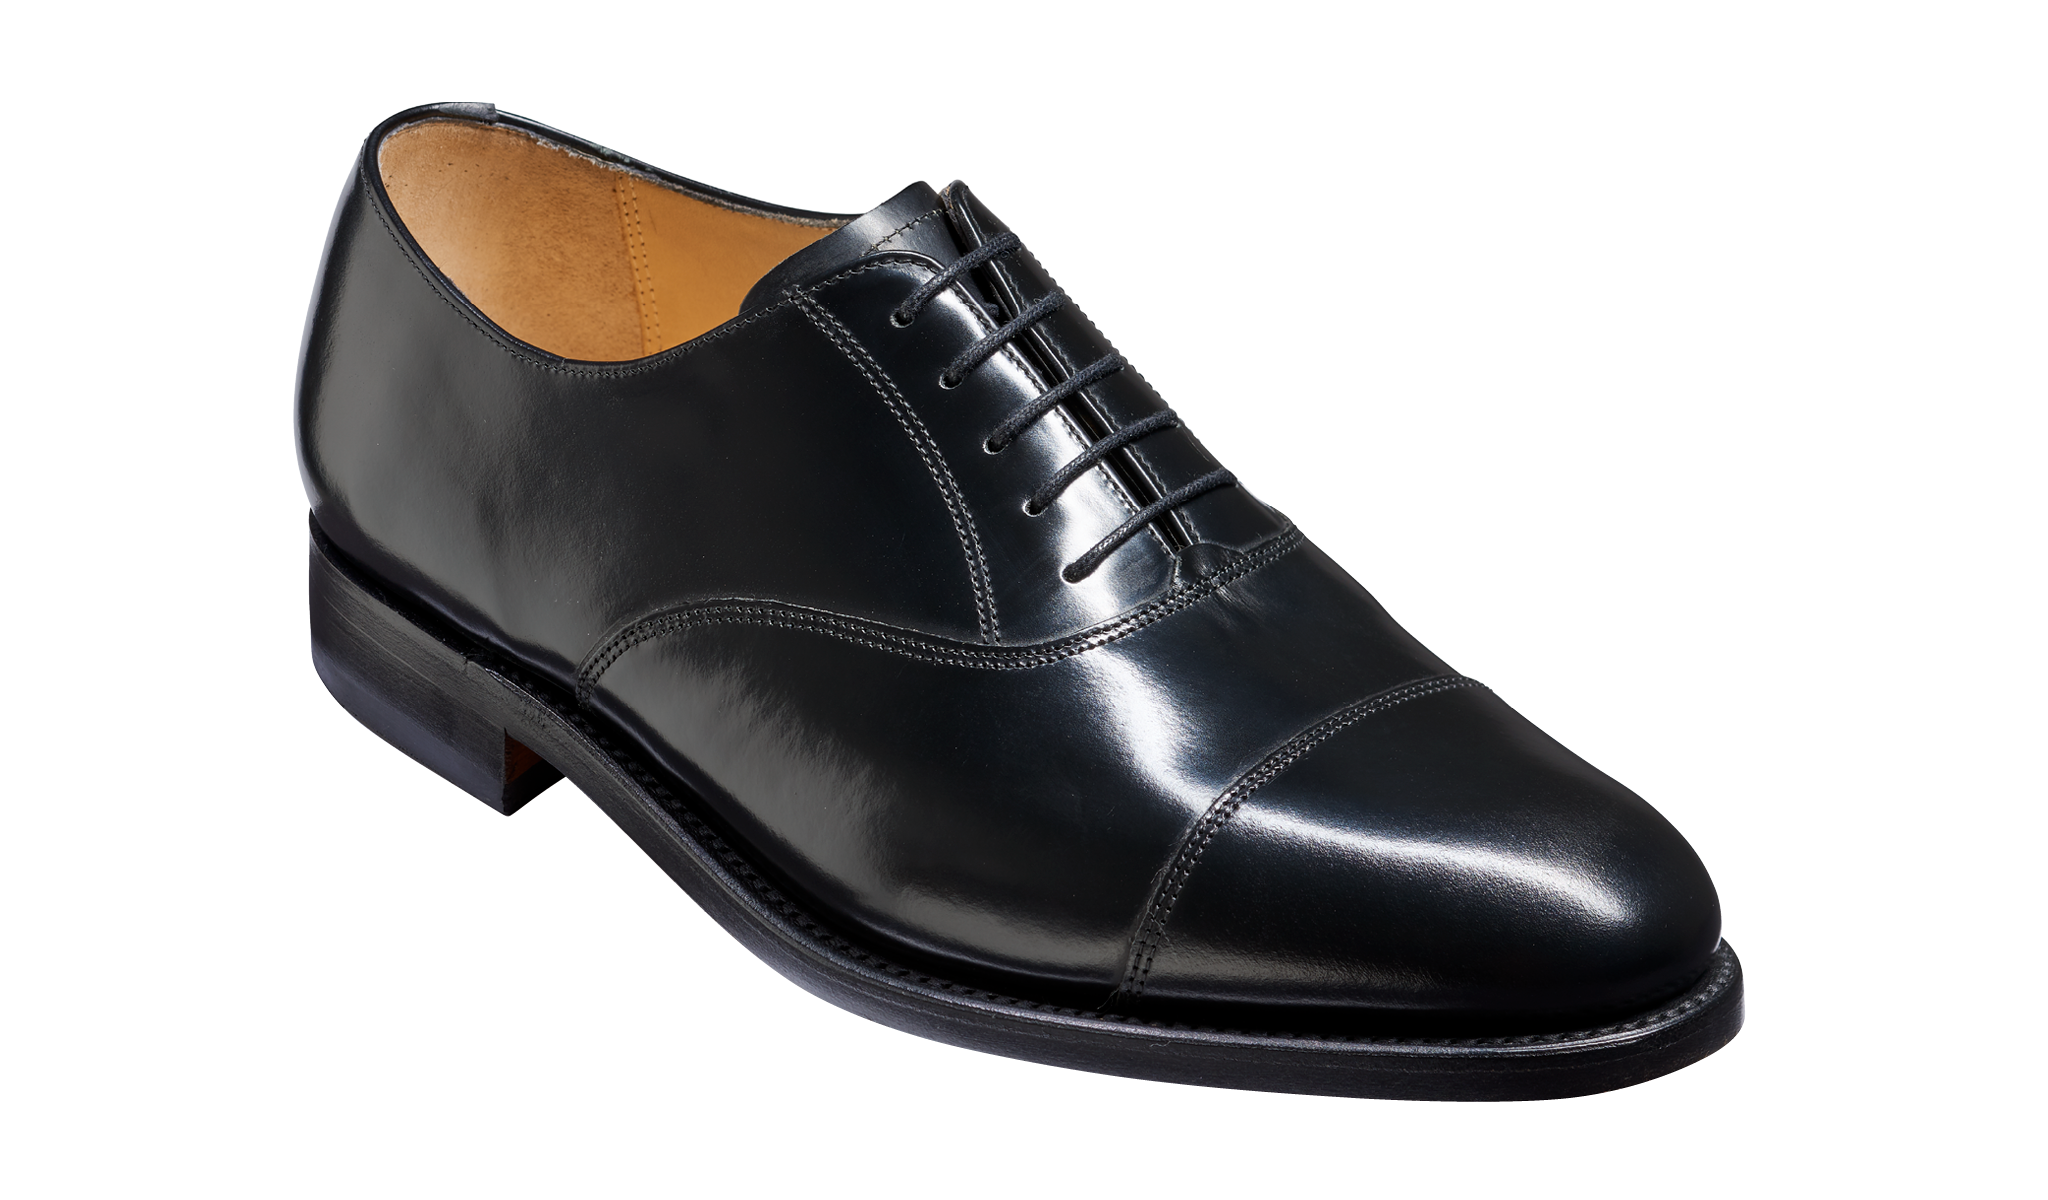 Arnold - Men's Black Leather Oxford Shoes From Barker